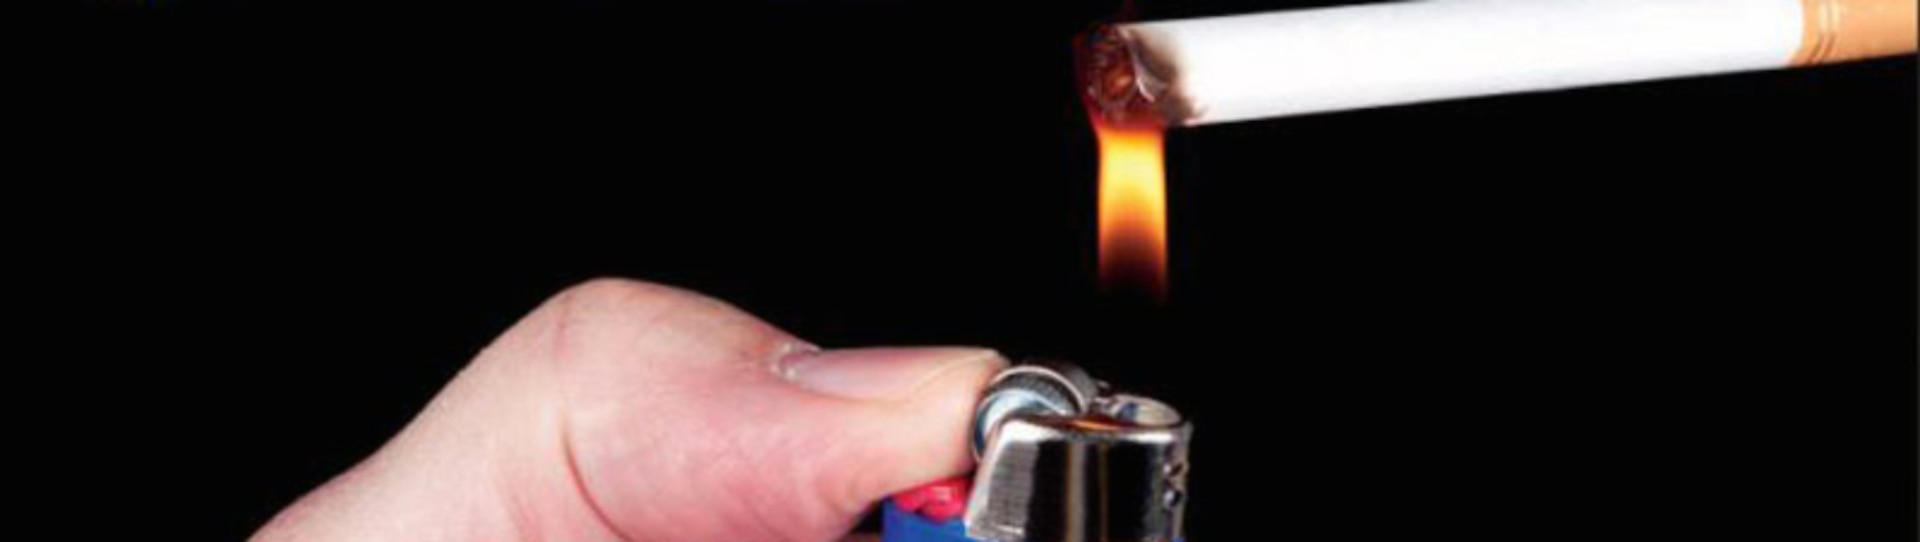 Fires involving smoking materials are preventable